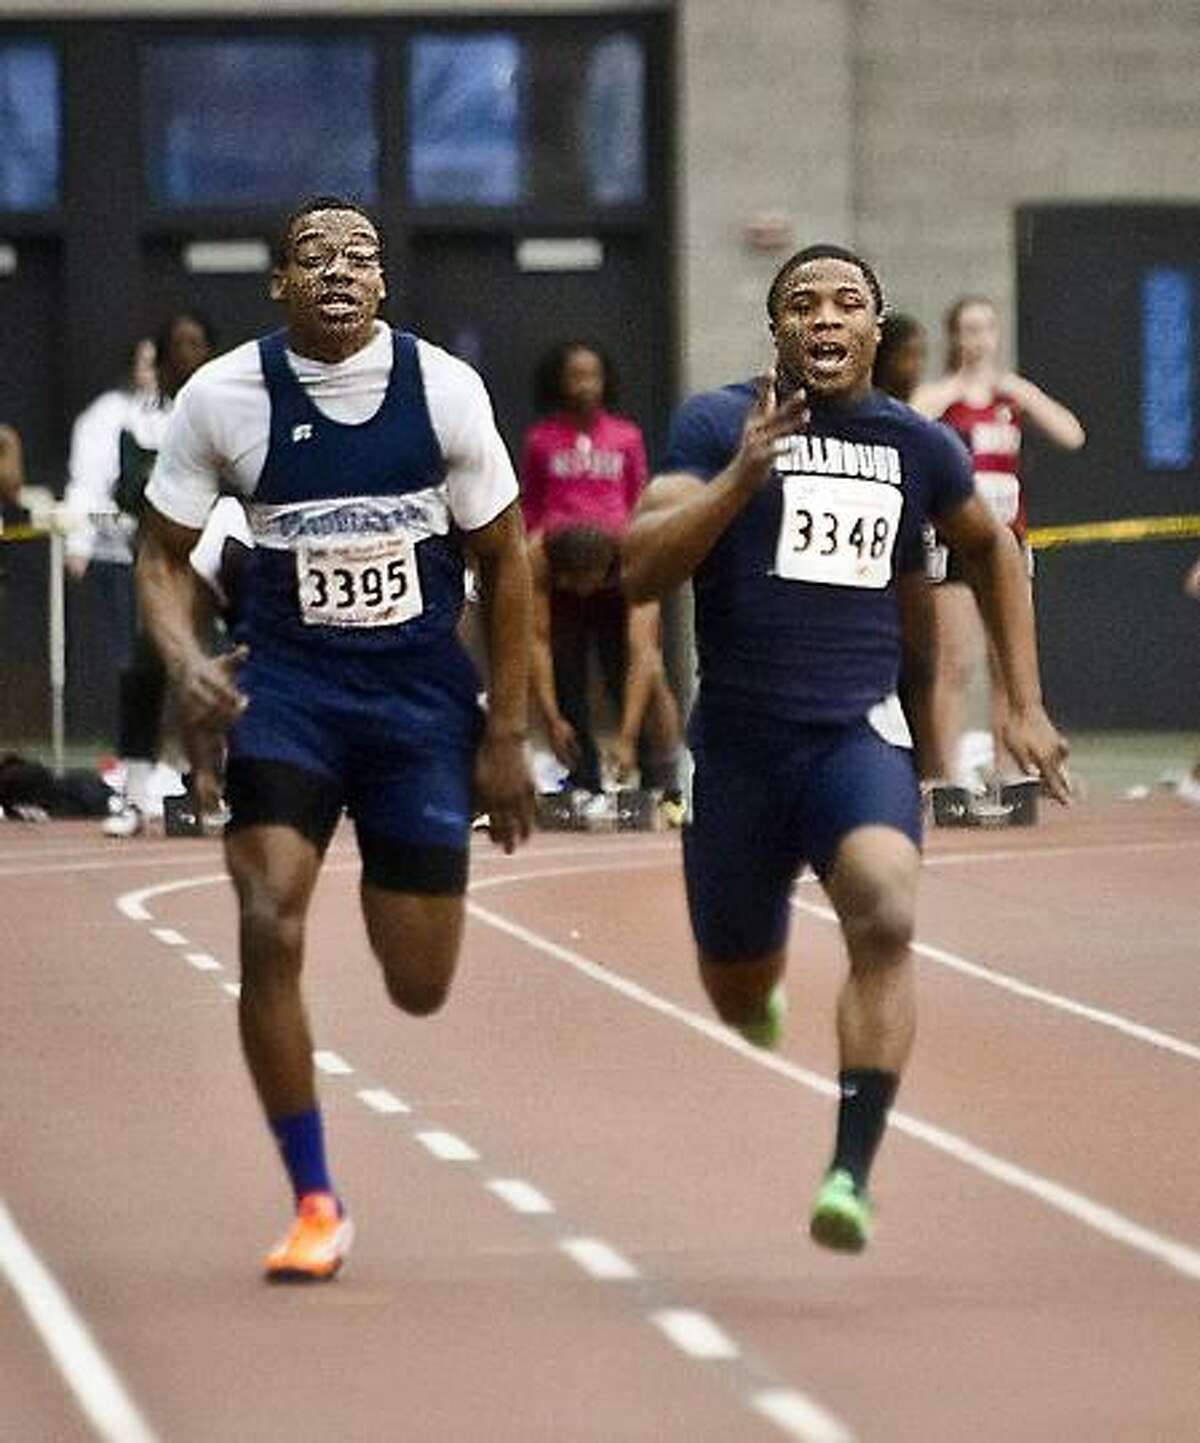 Melanie Stengel/New Haven Register State Open Track and Field Championships / Middletown's Jashane Brown, left, runs alongside winner Harold Cooper Jr. in the 55-meter dash at Tuesday's State Open in New Haven. 2/15/13